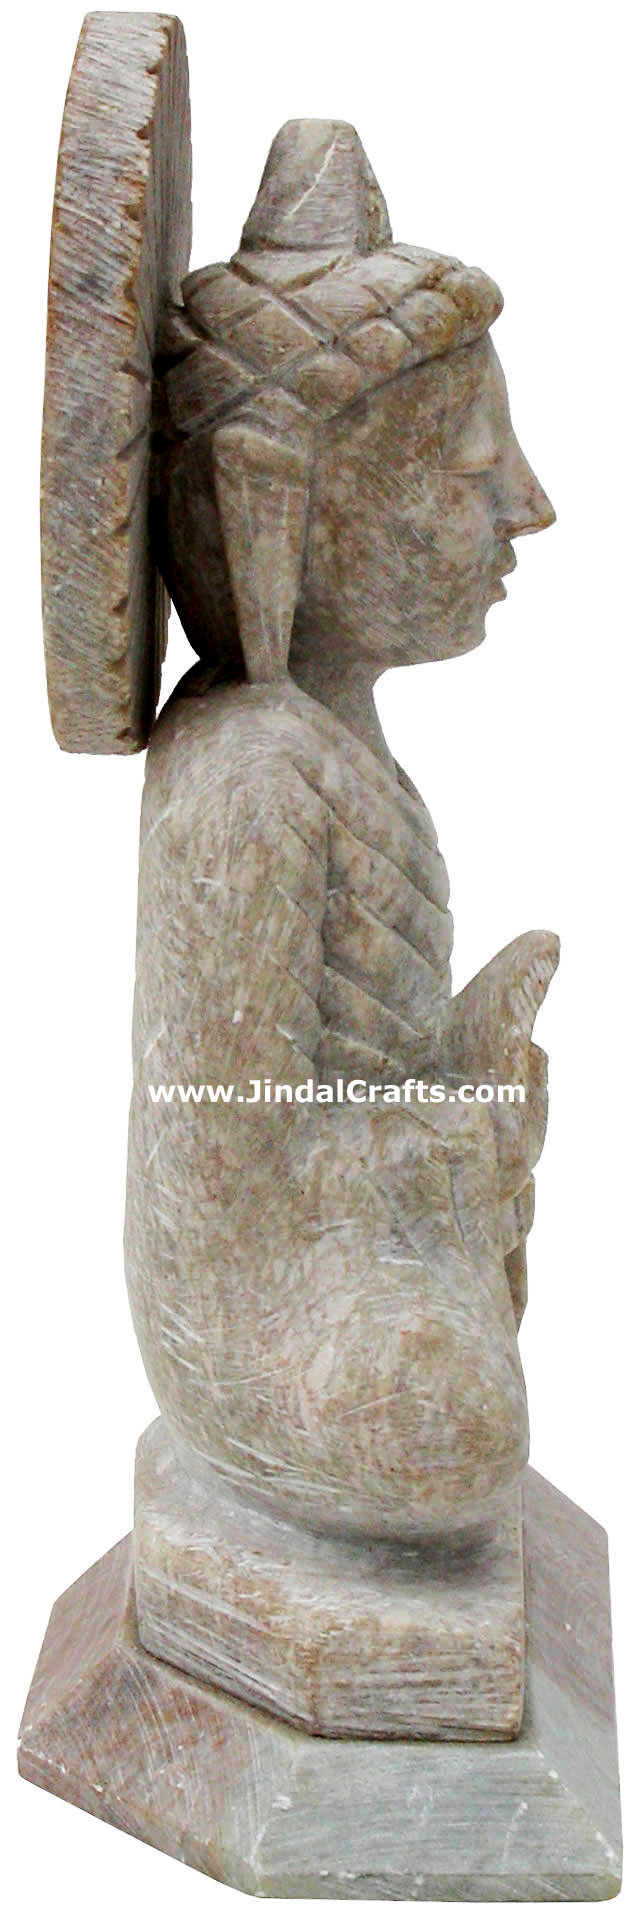 Lord Buddha Hand Carved Buddhisht Sculpture Stone Indian Artifacts Statues Idol